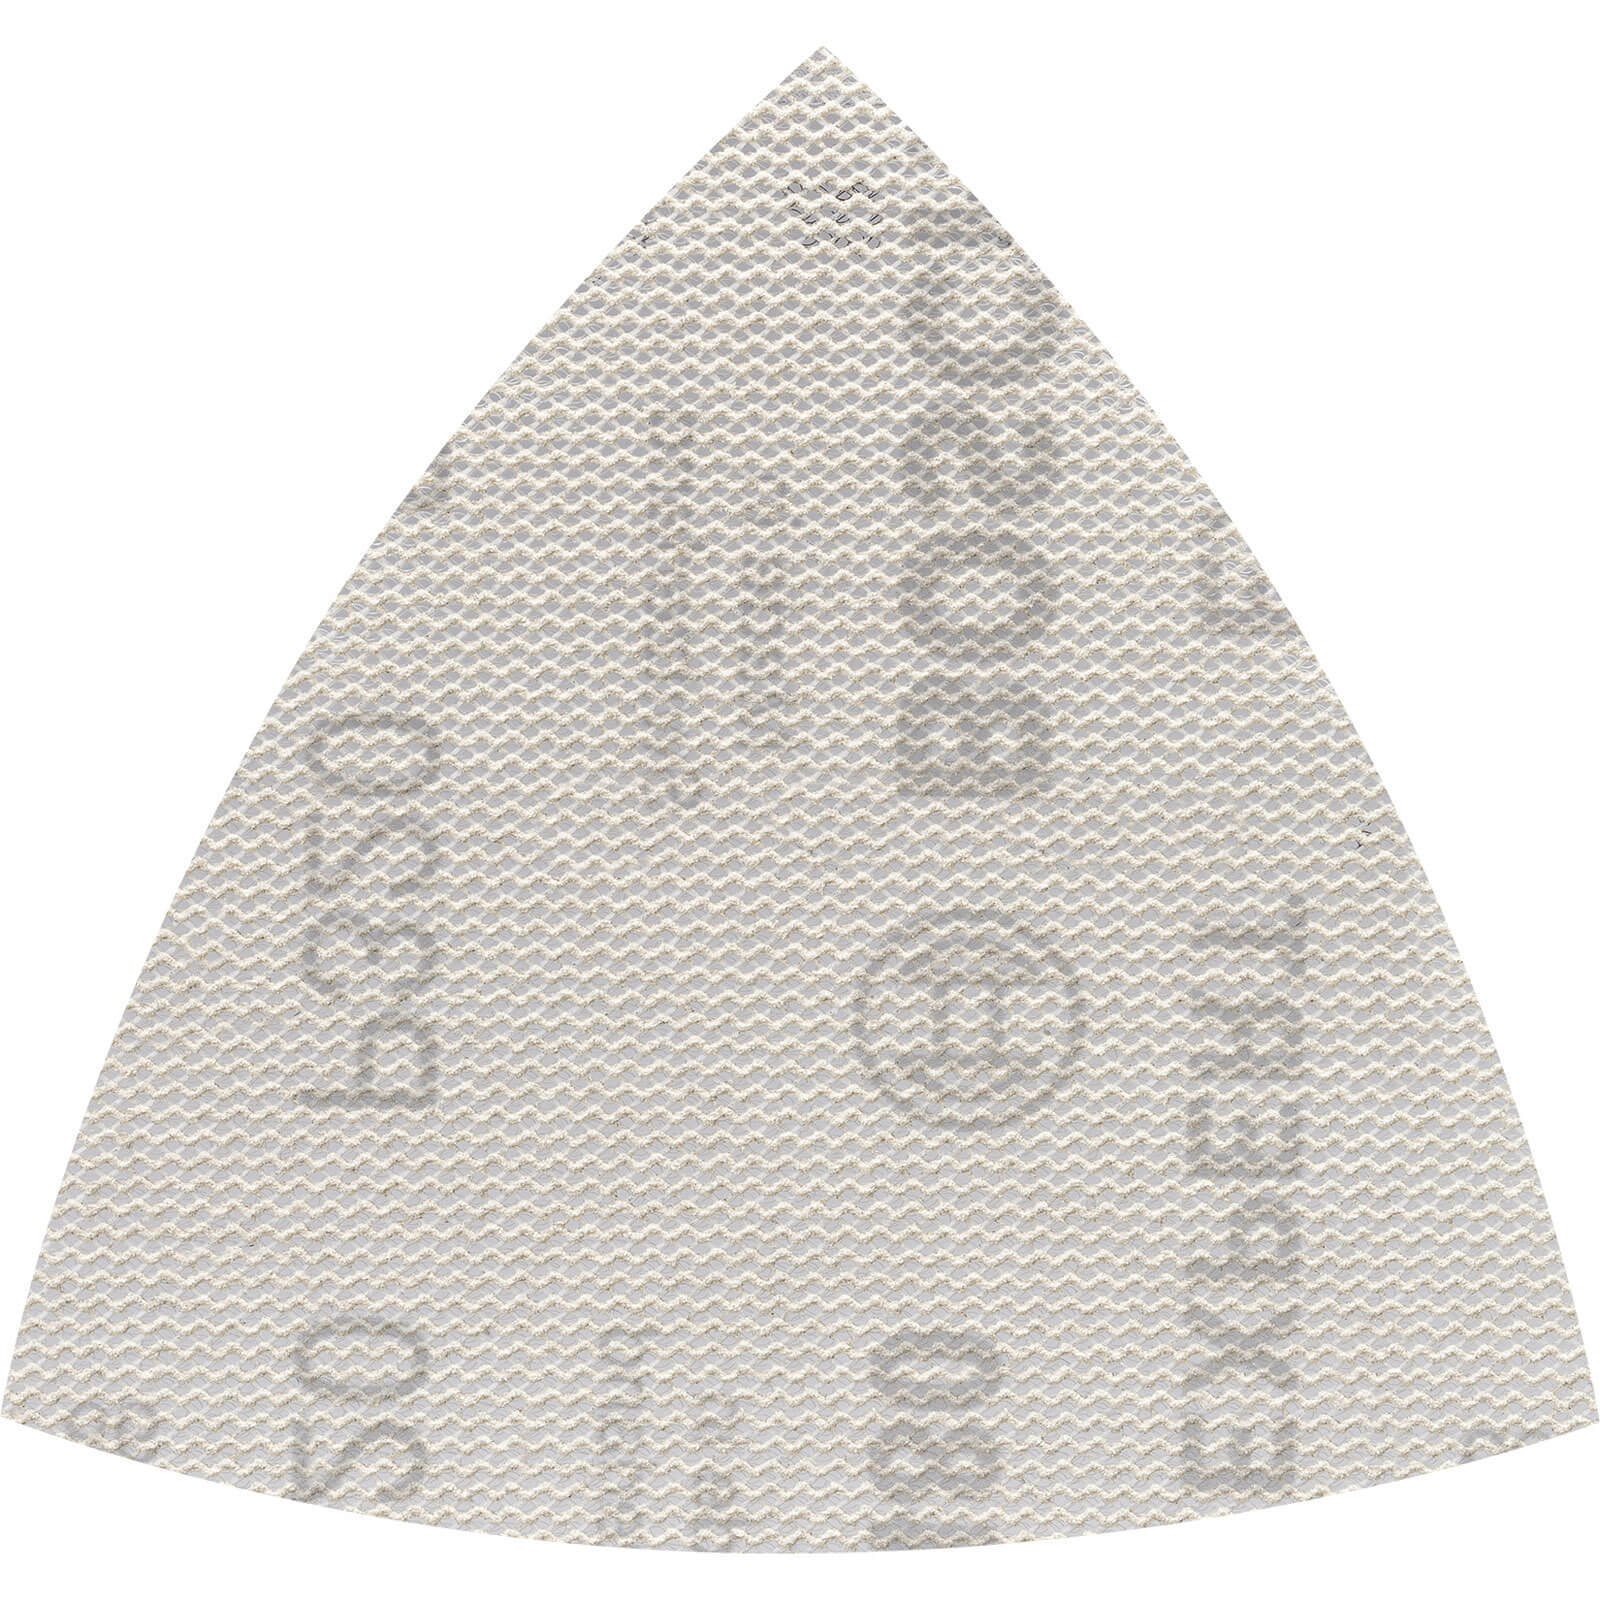 Bosch Expert M480 Quick Fit Net Delta Sanding Sheets for Paint and Wood 93mm x 93mm 320g Pack of 5